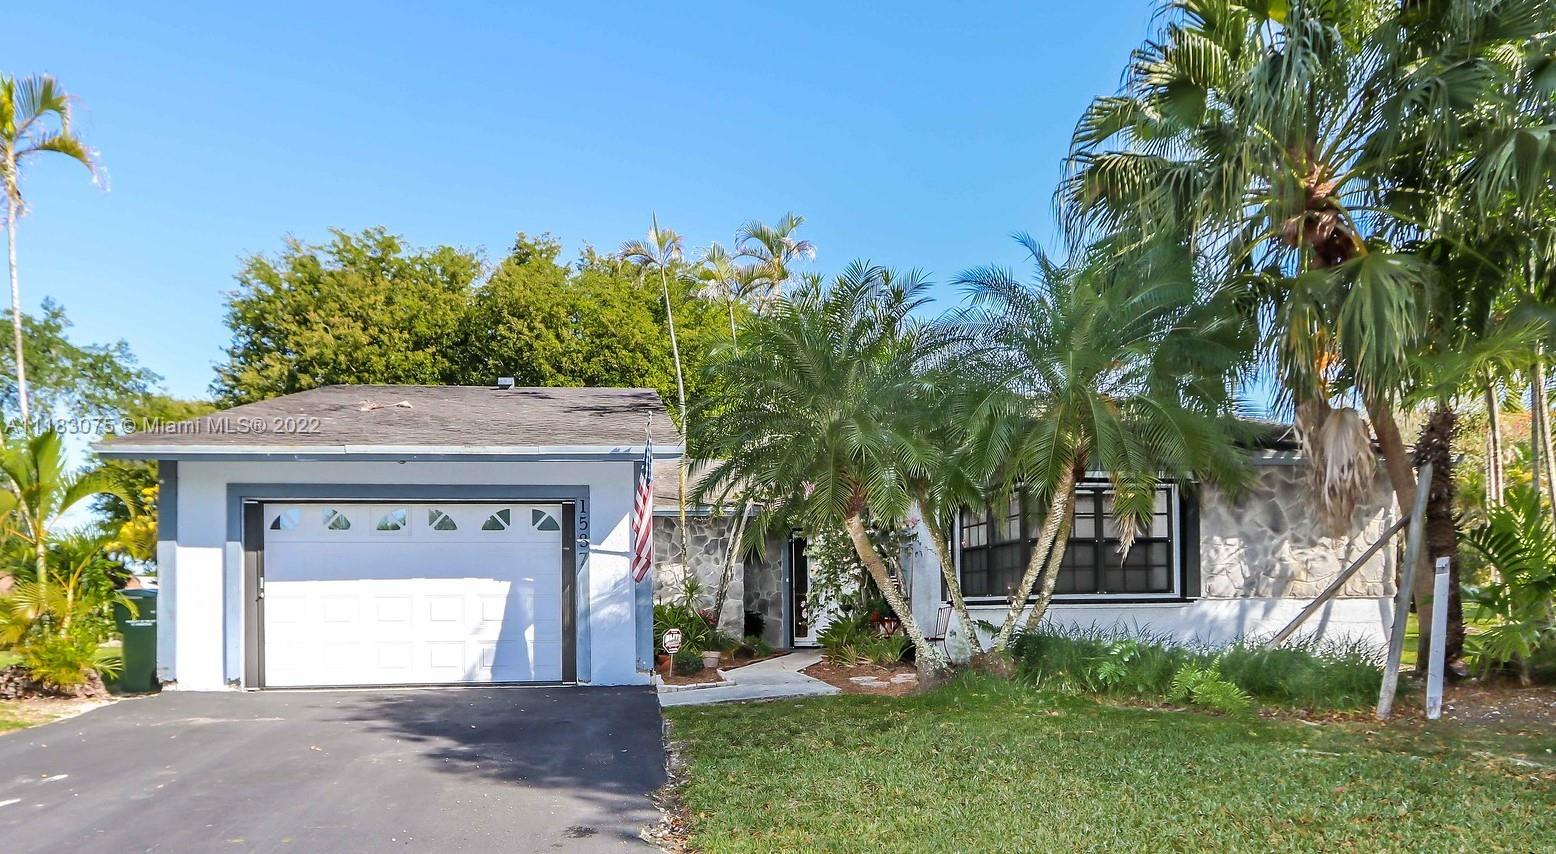 GREAT OPPORTUNITY TO OWN THIS 3 BR/ 2 BA HOME ON OVERSIZED LOT IN THE VILLAGES OF HOMESTEAD. GARAGE WAS CONVERTED TO A LARGE FAMILY ROOM OR CAN BE AN EXTRA BEDROOM WHICH OFFERS 1741 SQ FT OF LIVING AREA. OFFERS A SPLIT FLOOR PLAN, KITCHEN OPENS TO LIVING/ DINING AREA, SS APPLIANCES, OVERSIZED SCREENED IN TERRACE AND PLENTY OF ROOM FOR A POOL! THE VILLAGES OF HOMESTEAD HAS A LOW HOA BUT OFFERS SO MANY BENEFITS; CLUBHOUSE W/ GYM, LARGE POOL 7 SPA, POOL TABLES, TIKI HUT & BANQUET ROOM. THE NEIGHBORHOOD IS TRRE LINED WITH MILES OF WALKING TRAILS, LAKES AND AUDUBON PARK WITHIN WALKING DISTANCE FROM THE HOUSE.